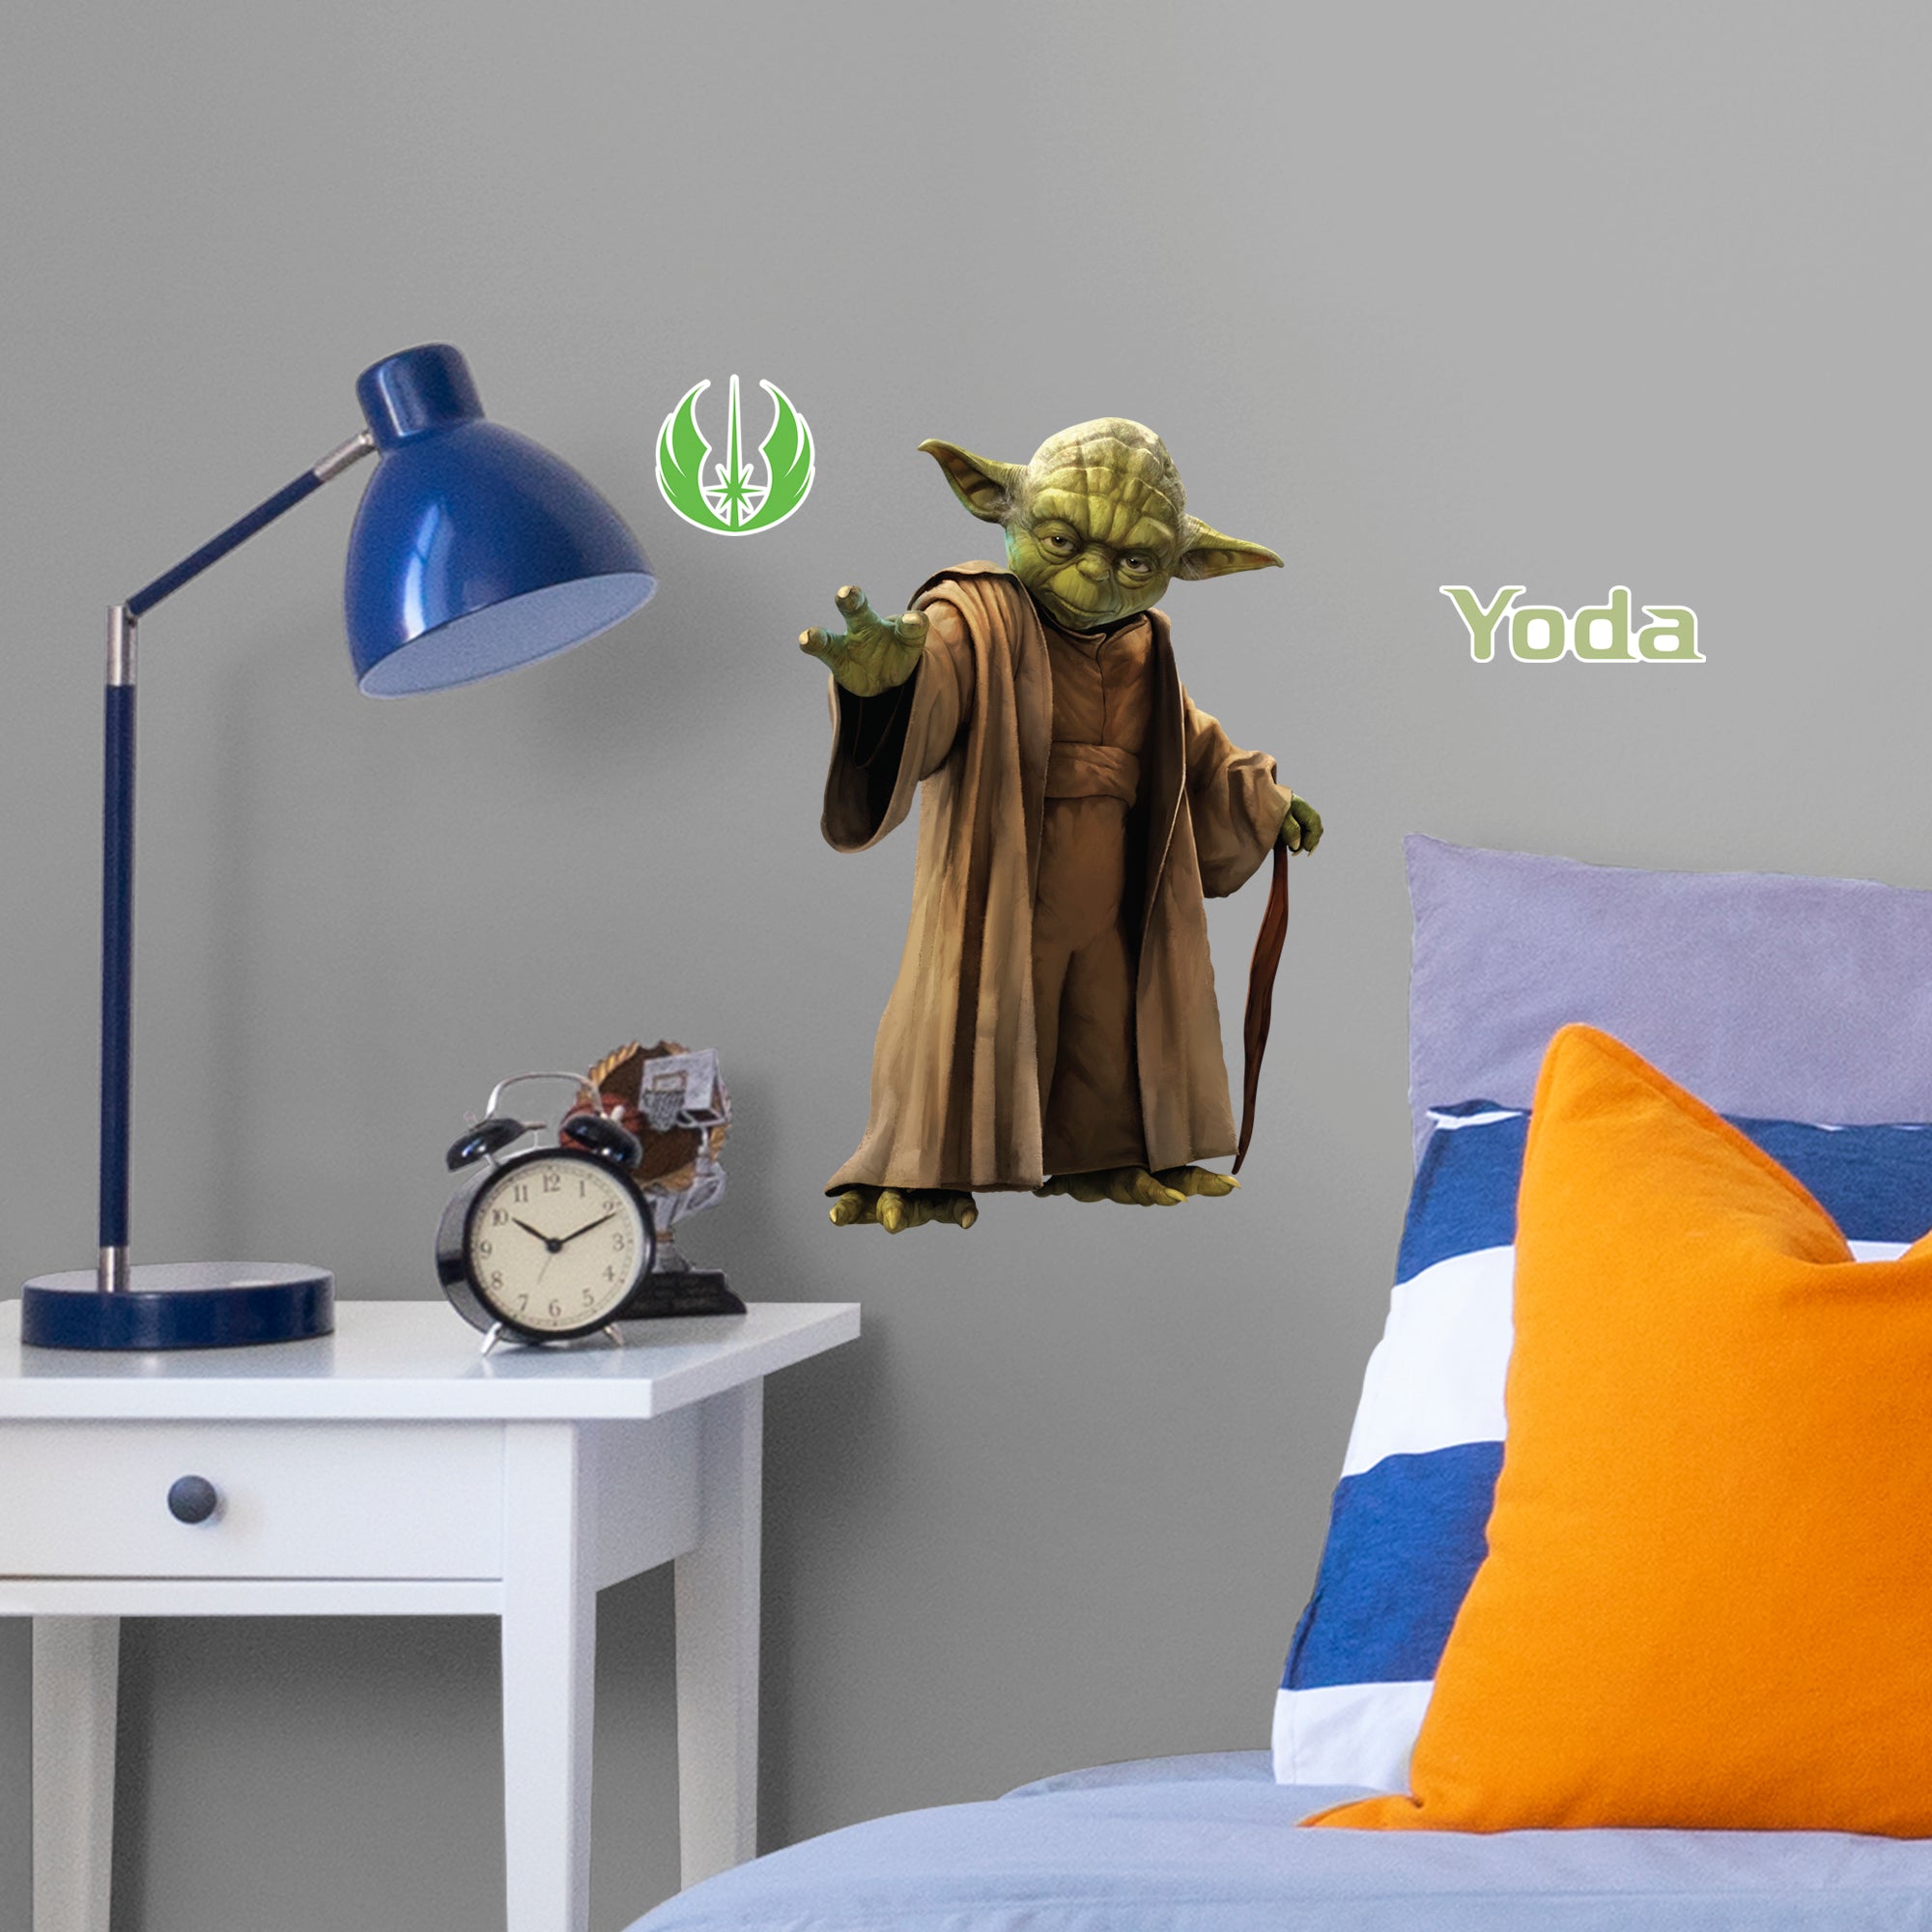 Yoda 2020 - Officially Licensed Star Wars Removable Wall Decal Large by Fathead | Vinyl